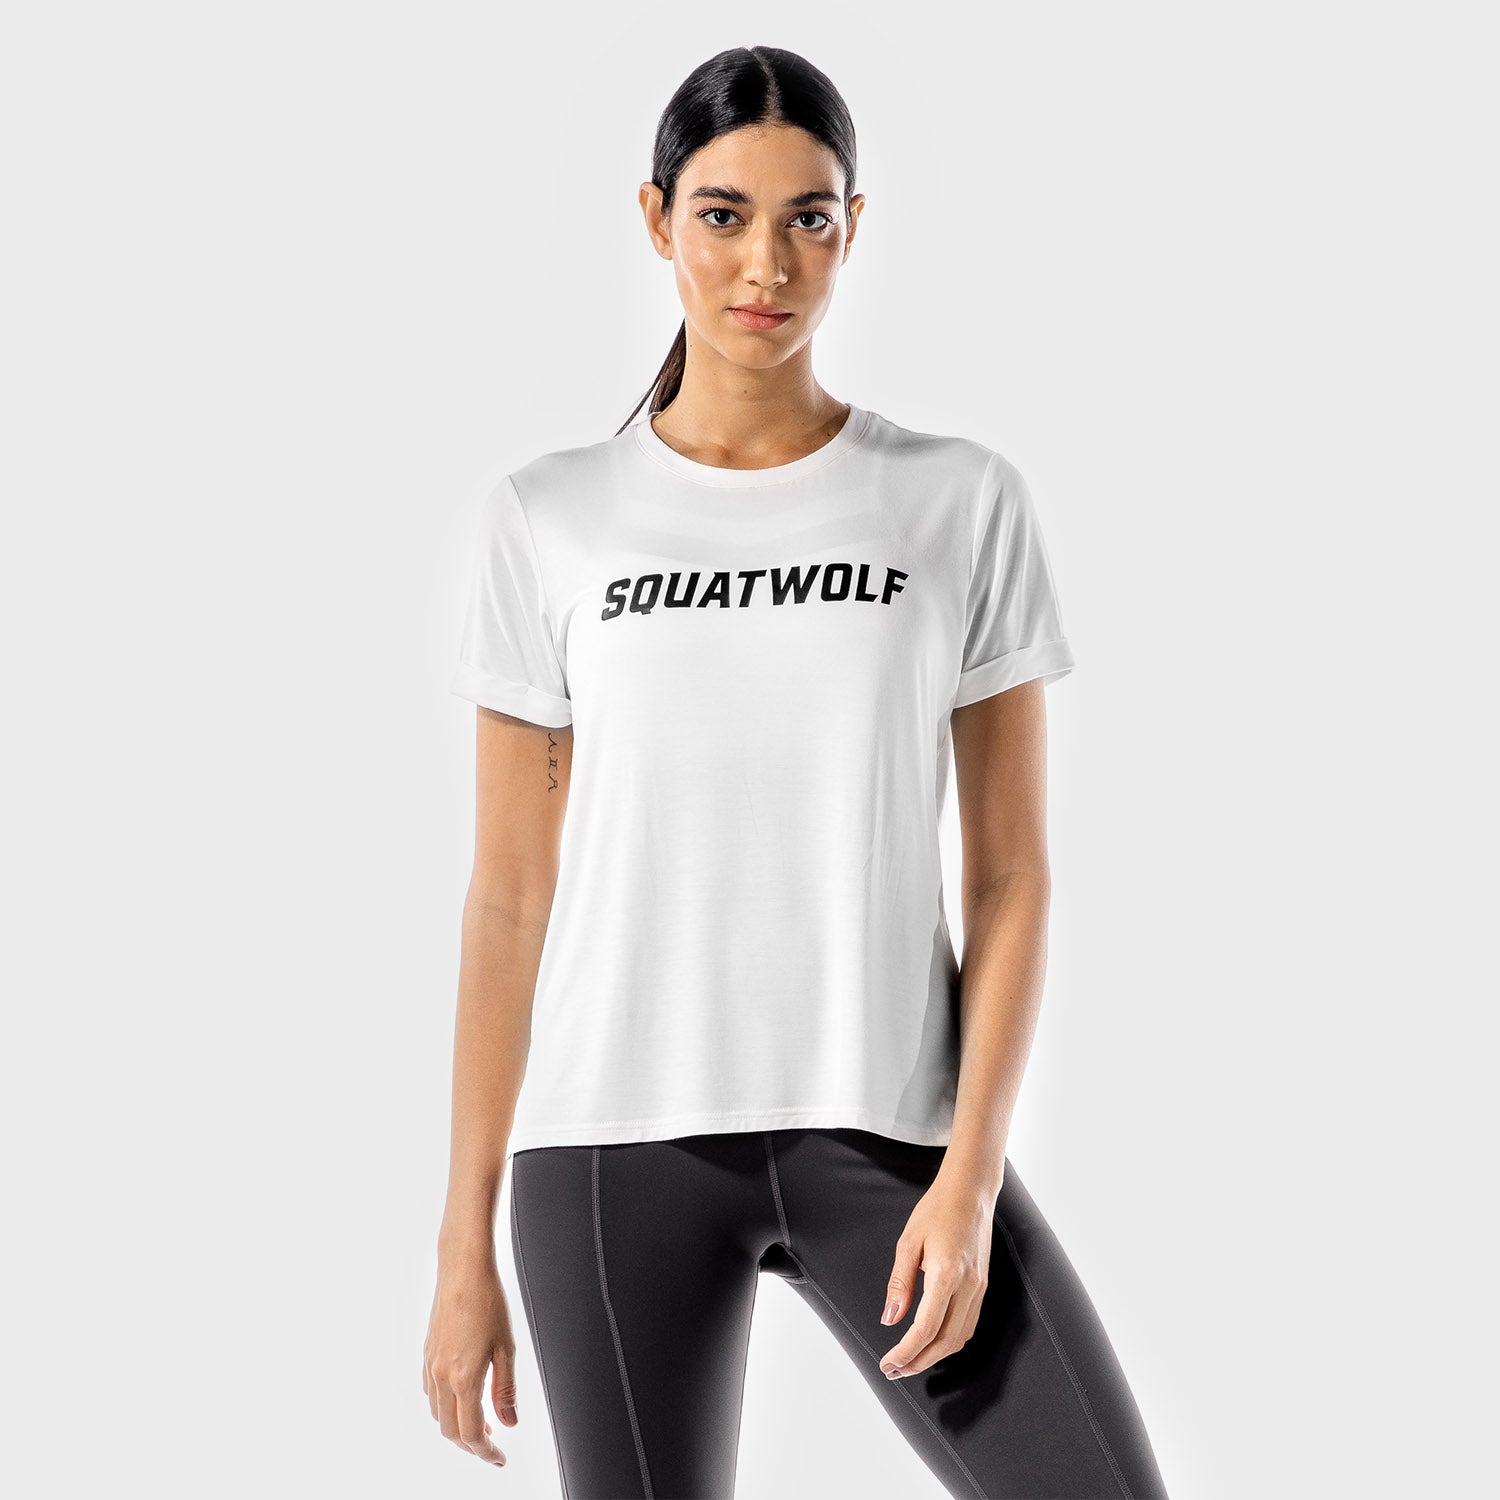 squatwolf-workout-shirts-for-men-new-drop-iconic-tee-white-gym-wear